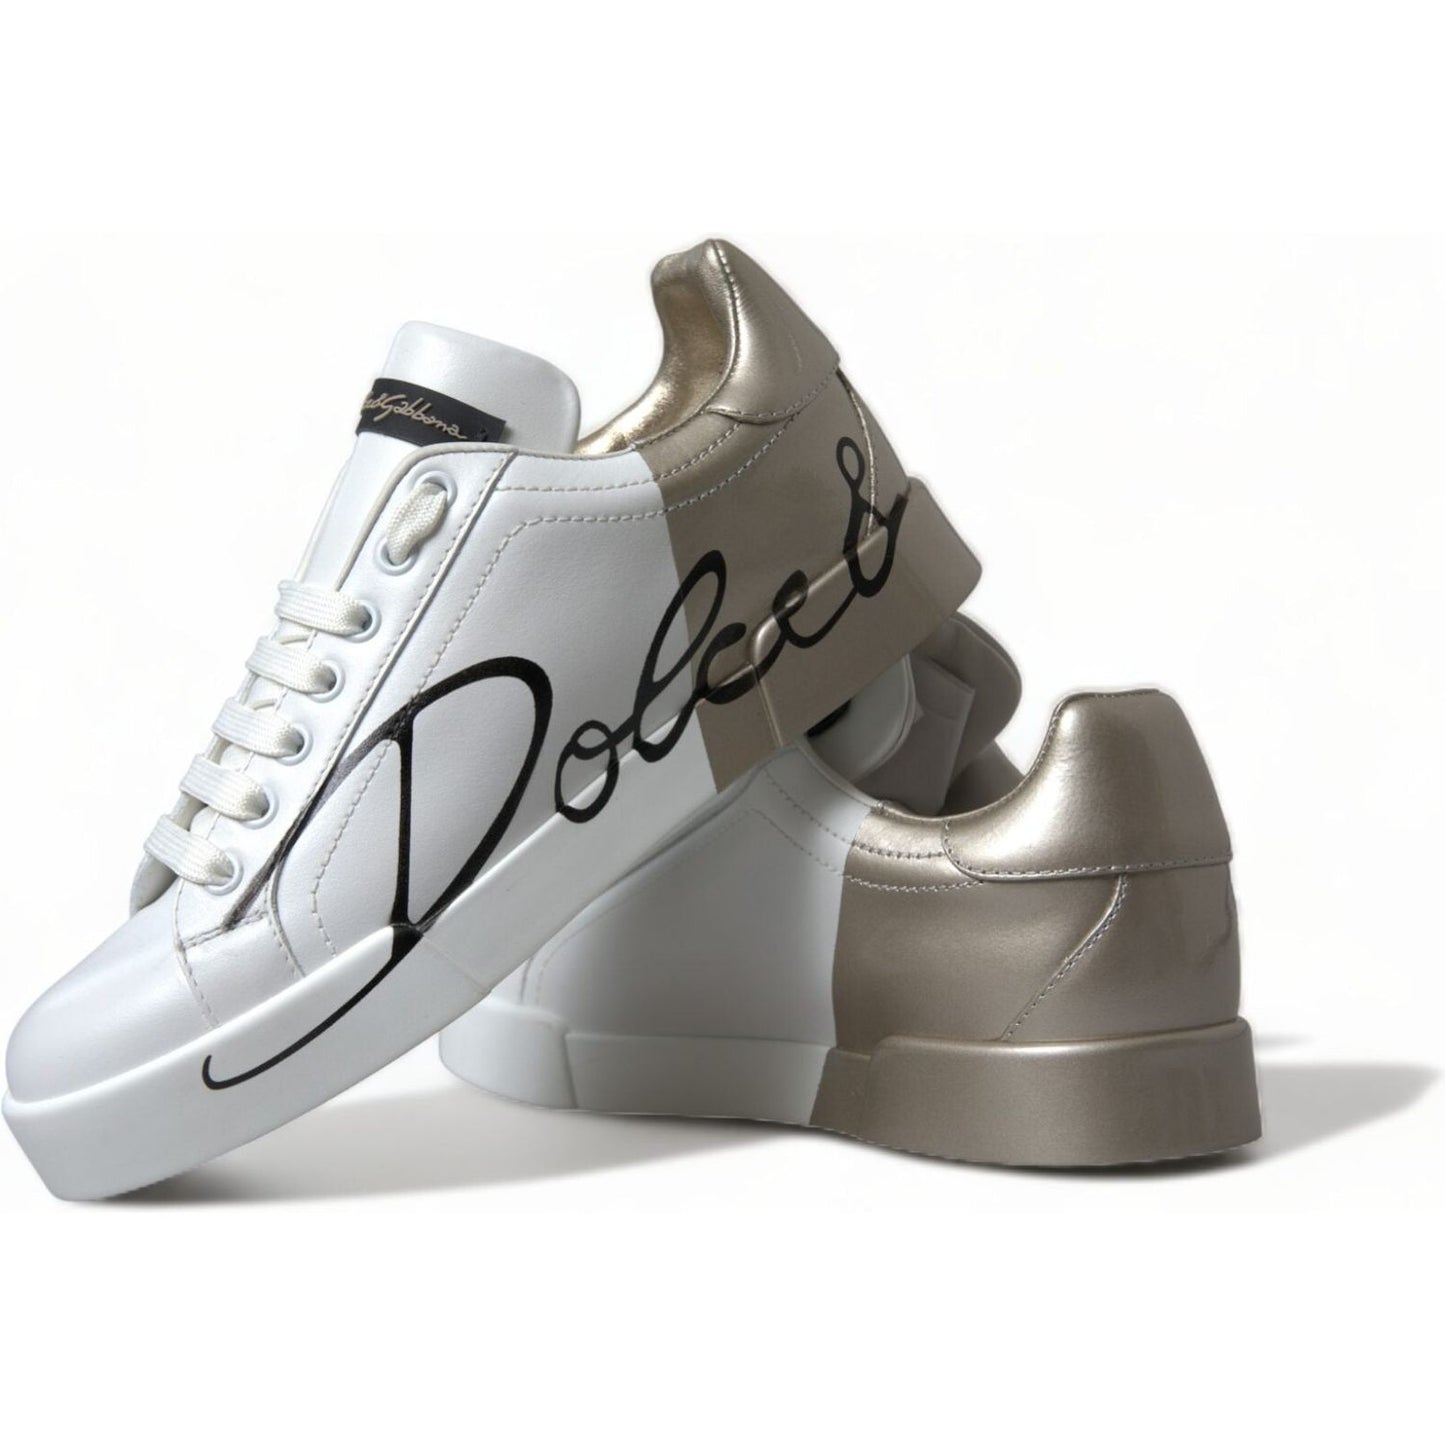 Dolce & Gabbana Elegant White & Gold Leather Sneakers white-gold-lace-up-womens-low-top-sneakers 465A2621-BG-scaled-1db358fa-c31.jpg